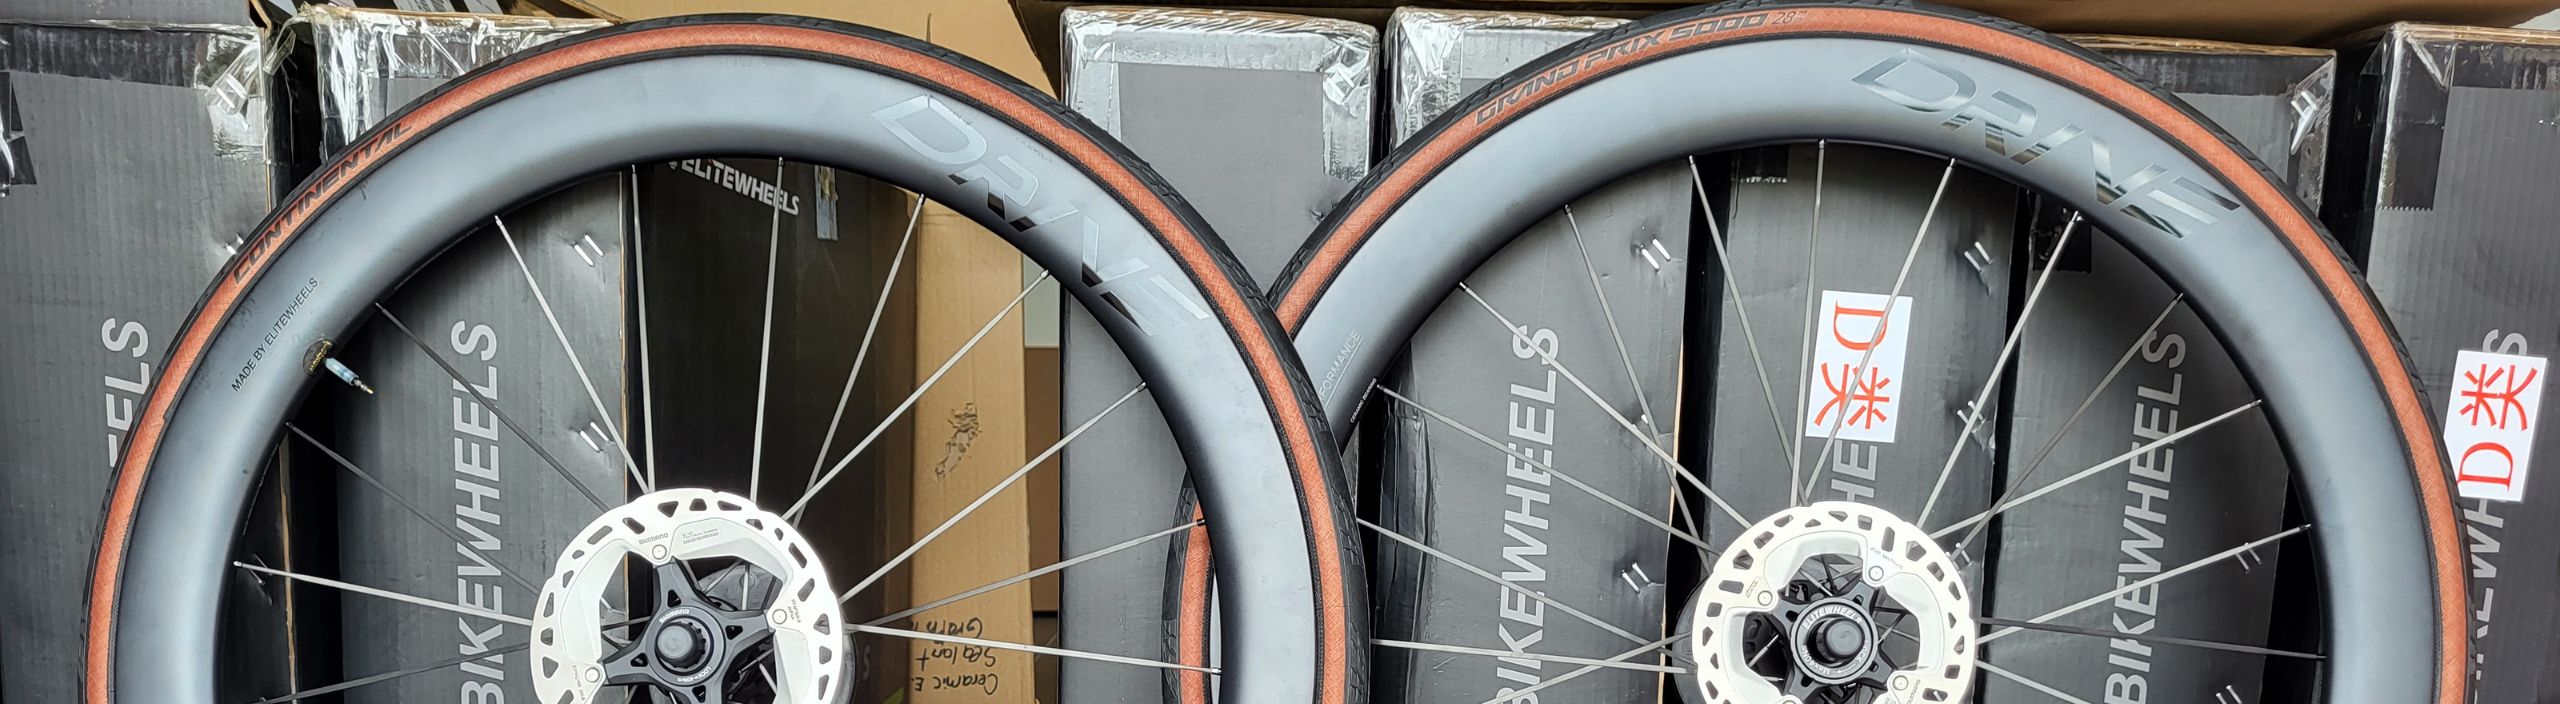 Continental tires by Cyclehub.dk